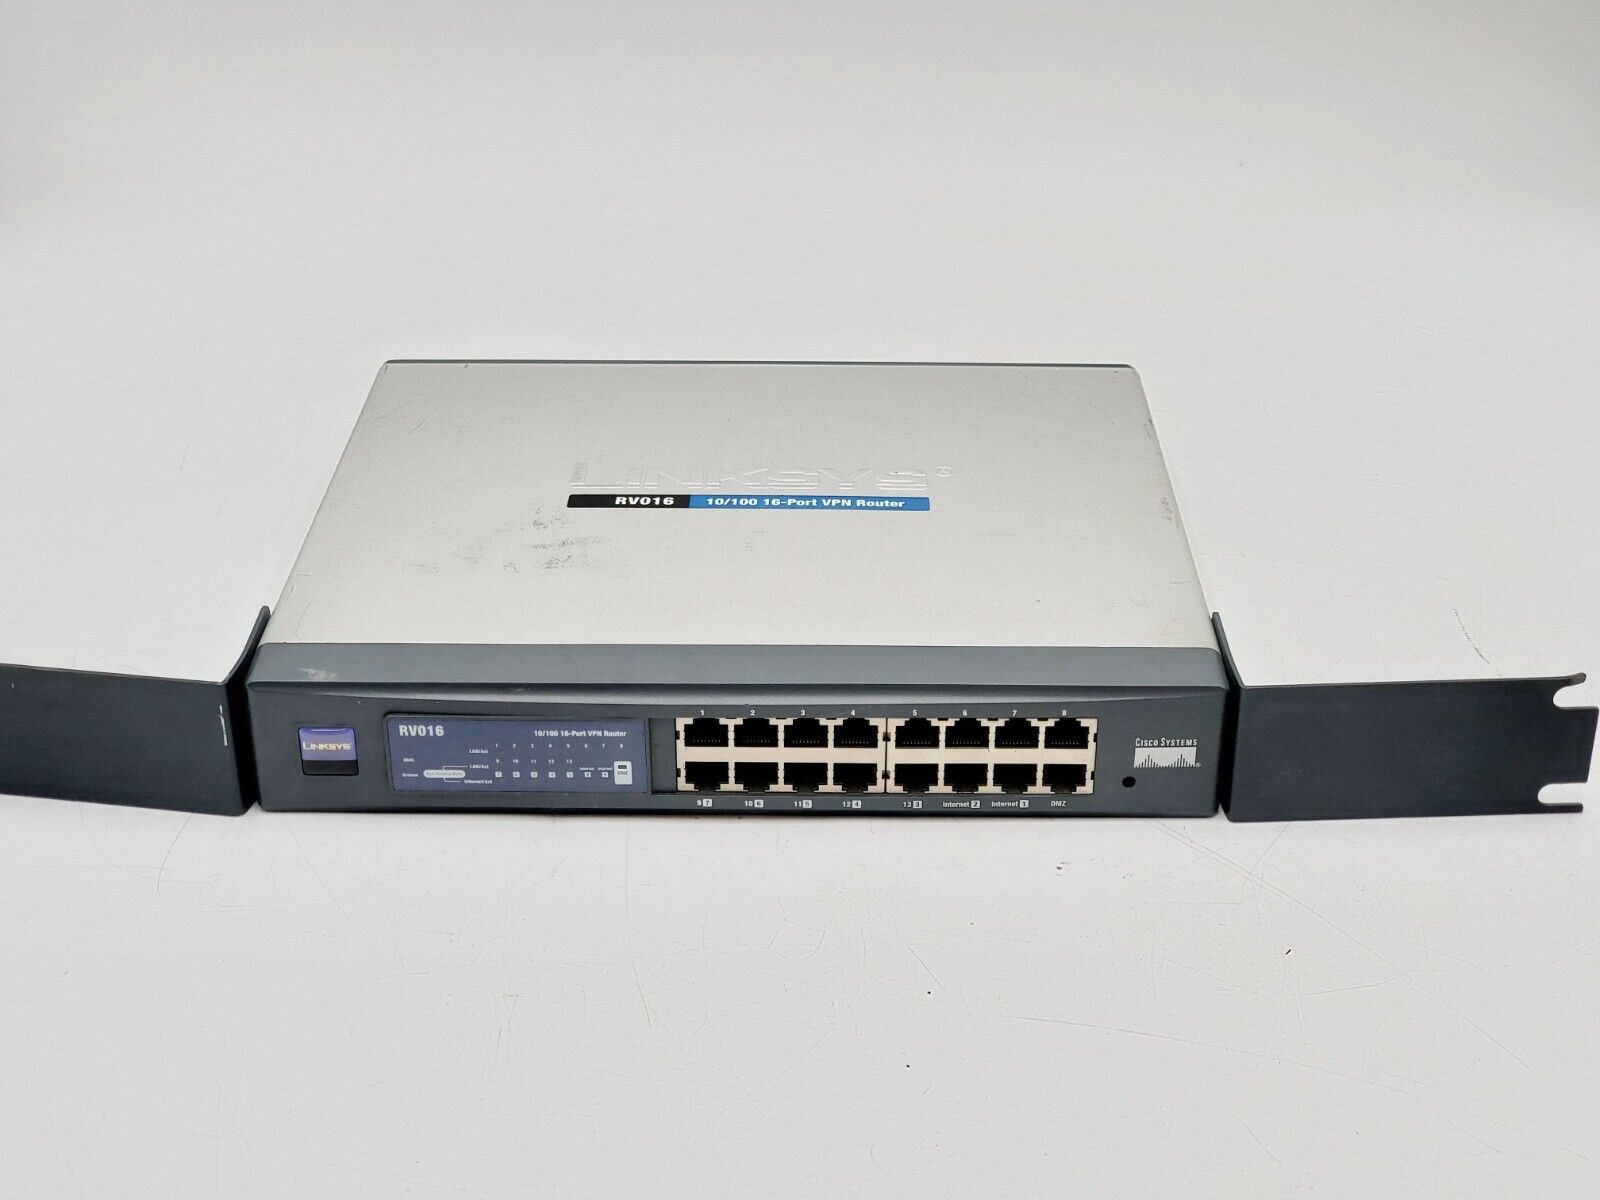 Linksys 10/100 16-Port VPN Router RV016 With Rack Ears